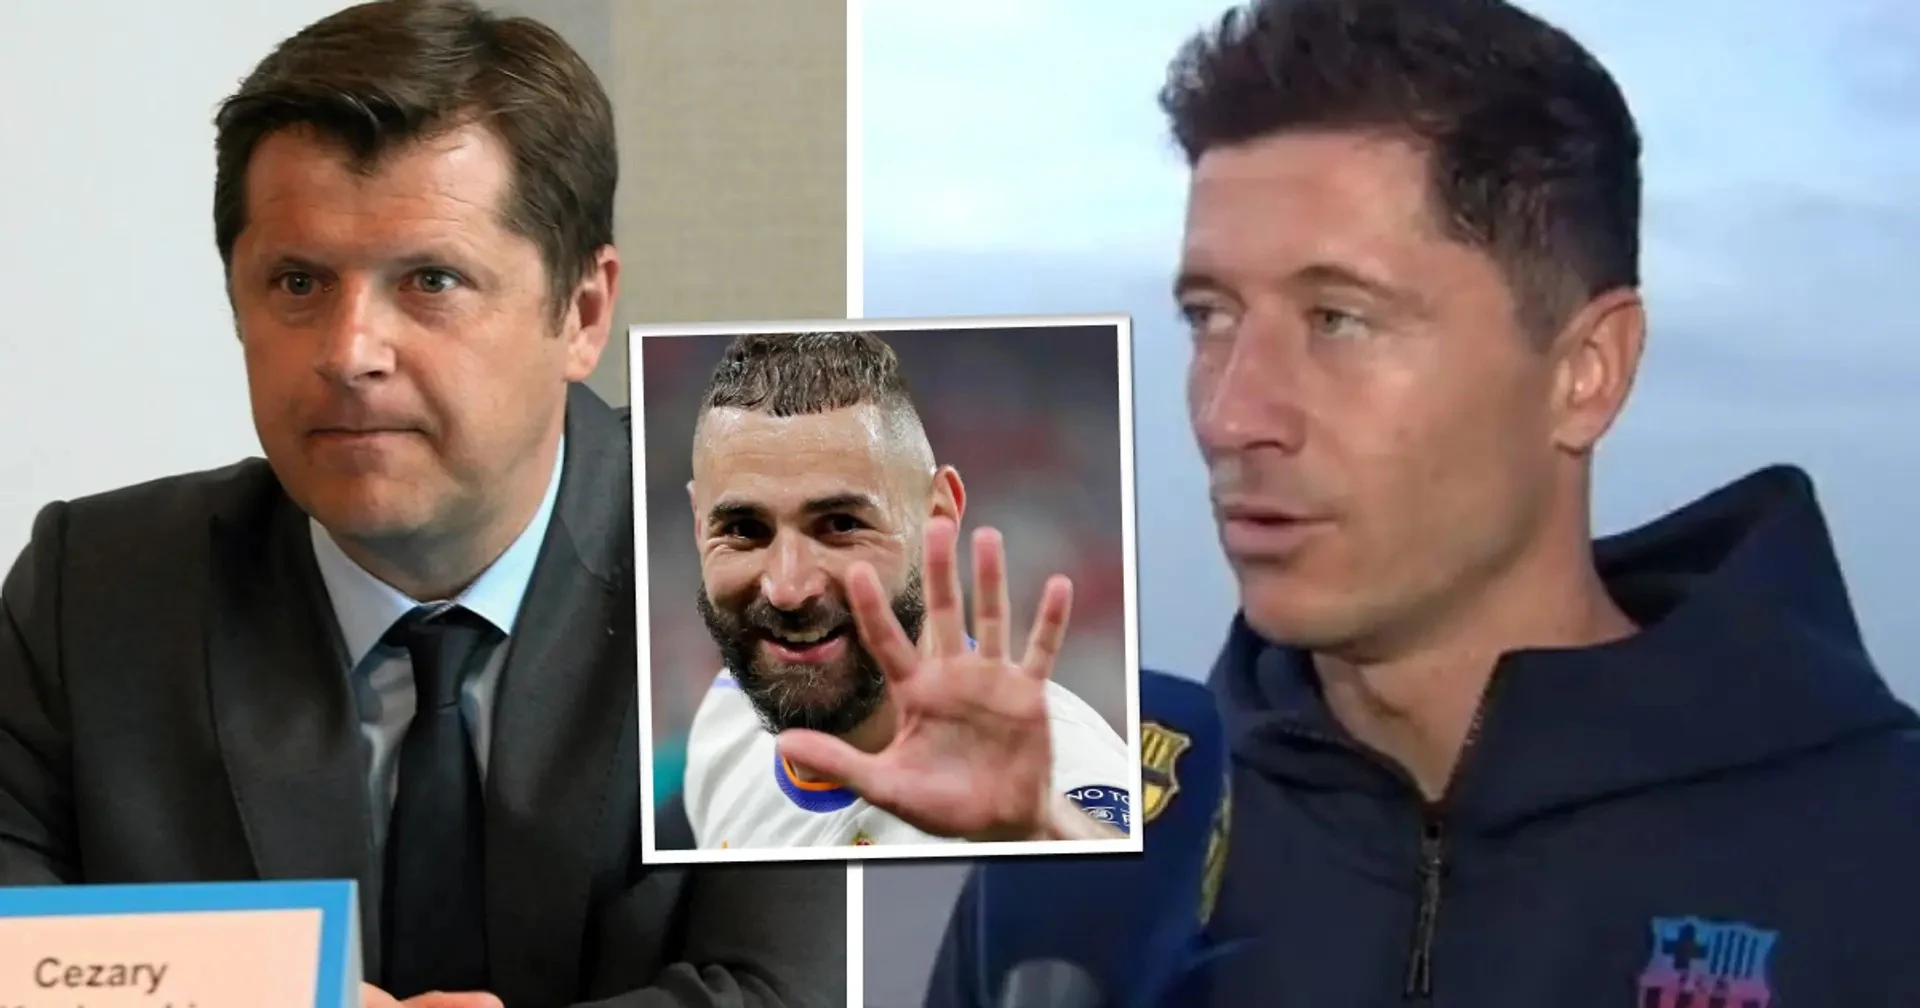 Lewandowski's former agent reveals real reason why he join Barca - 'to prove his better than Benzema'